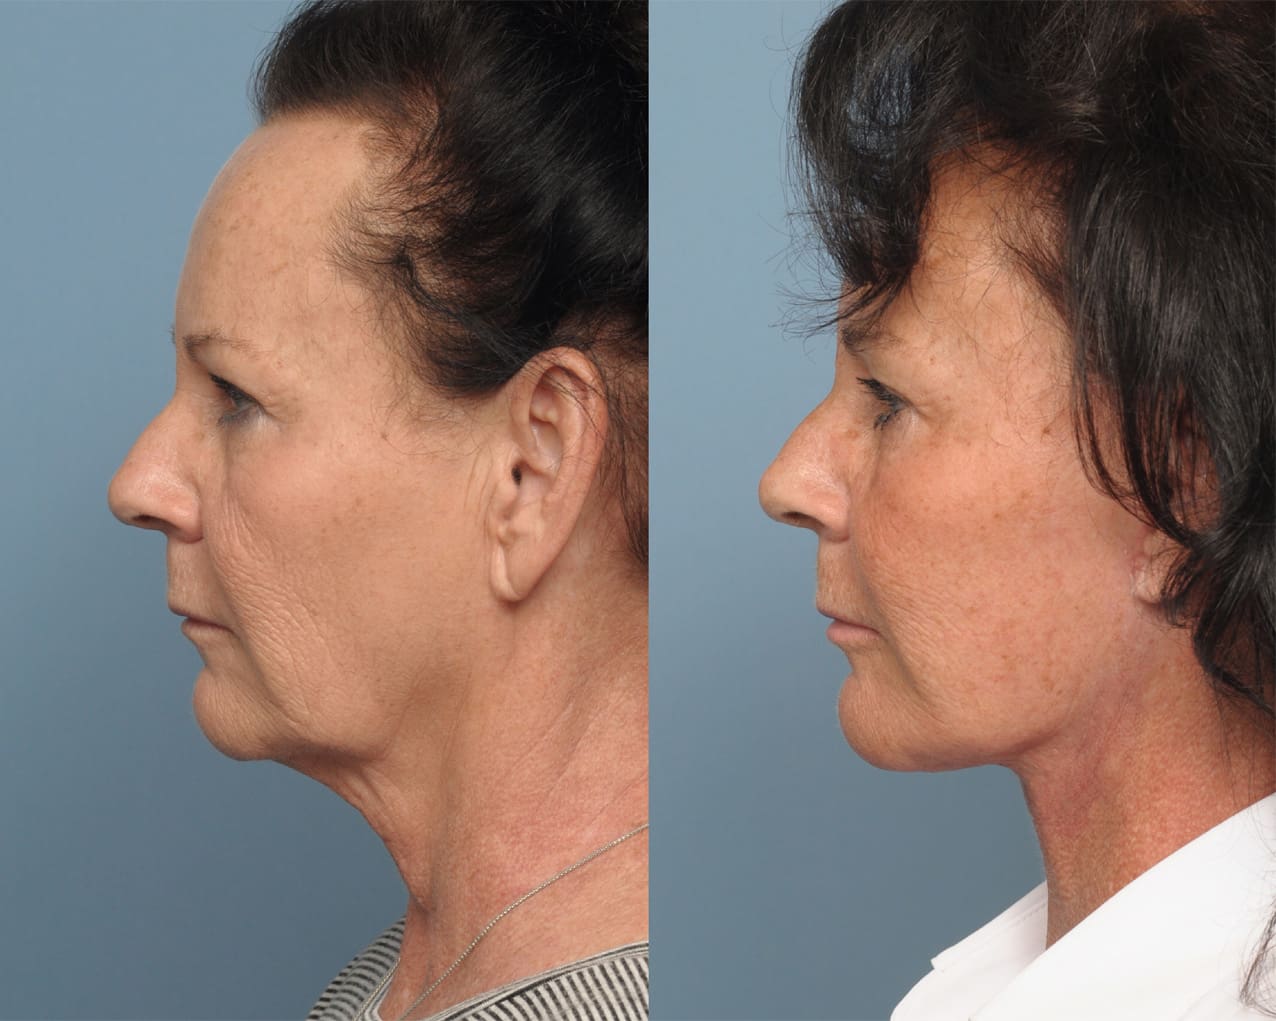 FACELIFT & NECK LIFT SURGERY: WHAT IT IS AND WHAT TO EXPECT